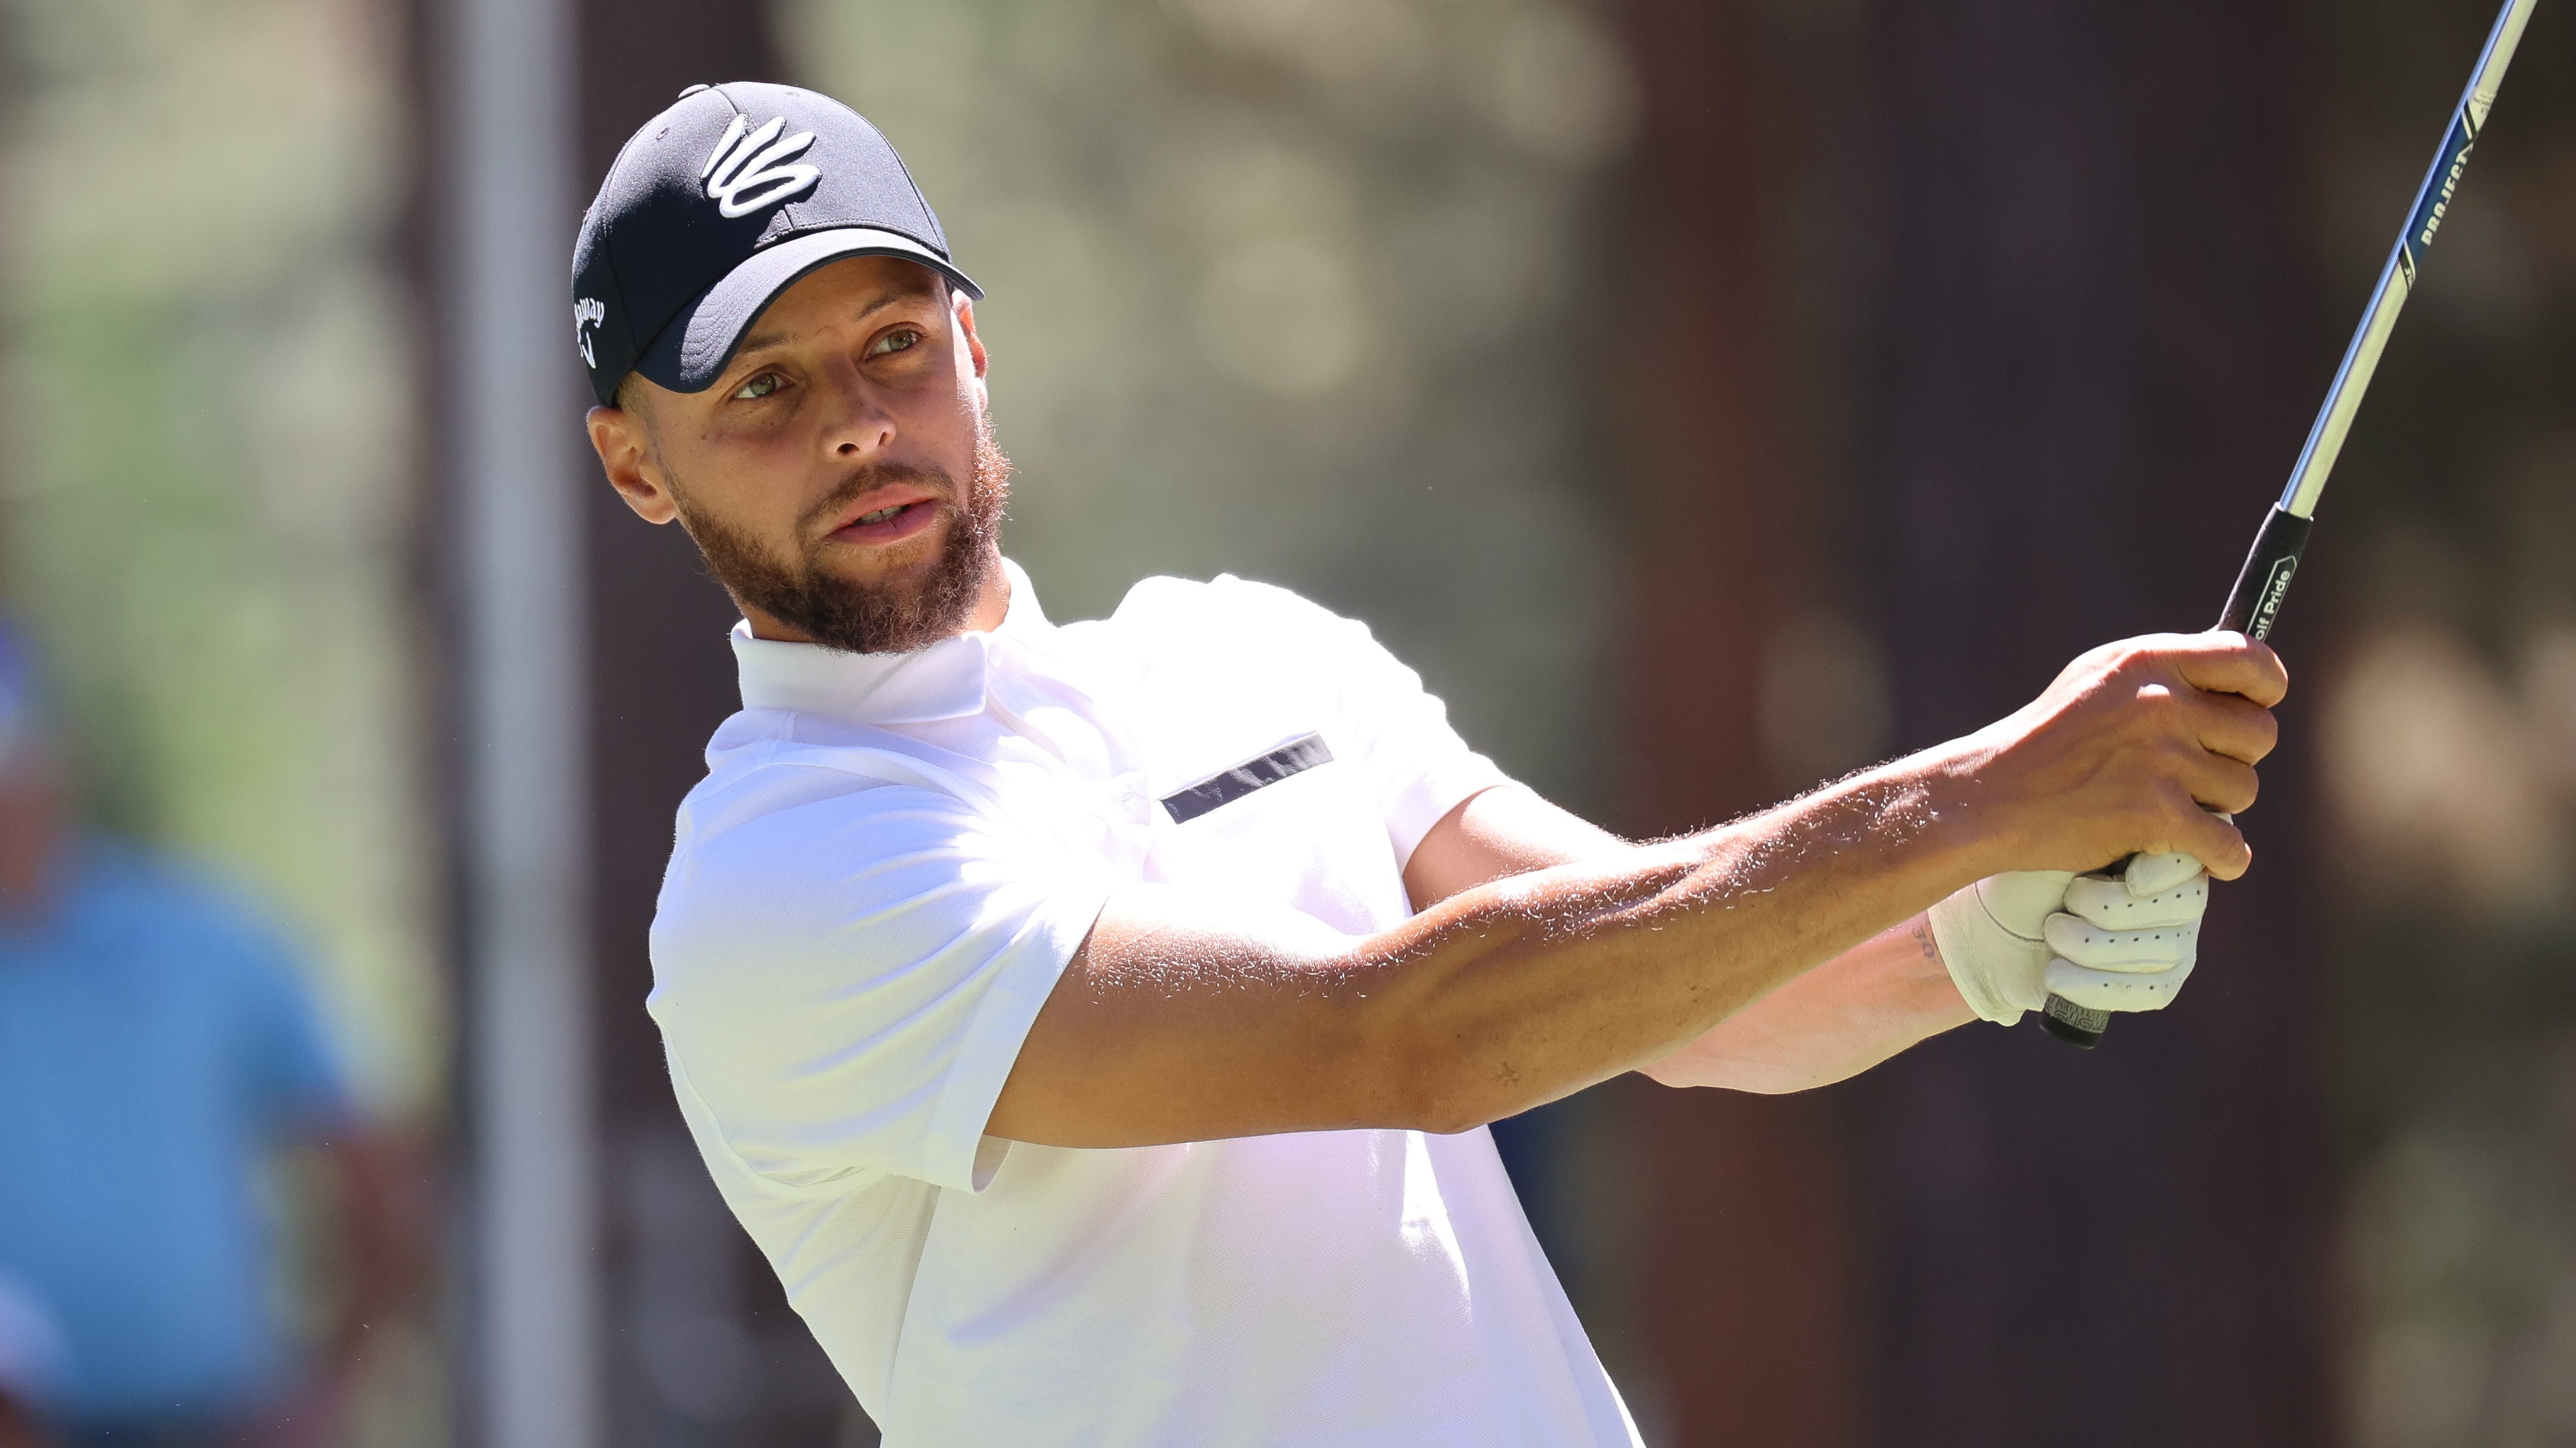 Steph Curry tops American Century Championship leaderboard entering final round